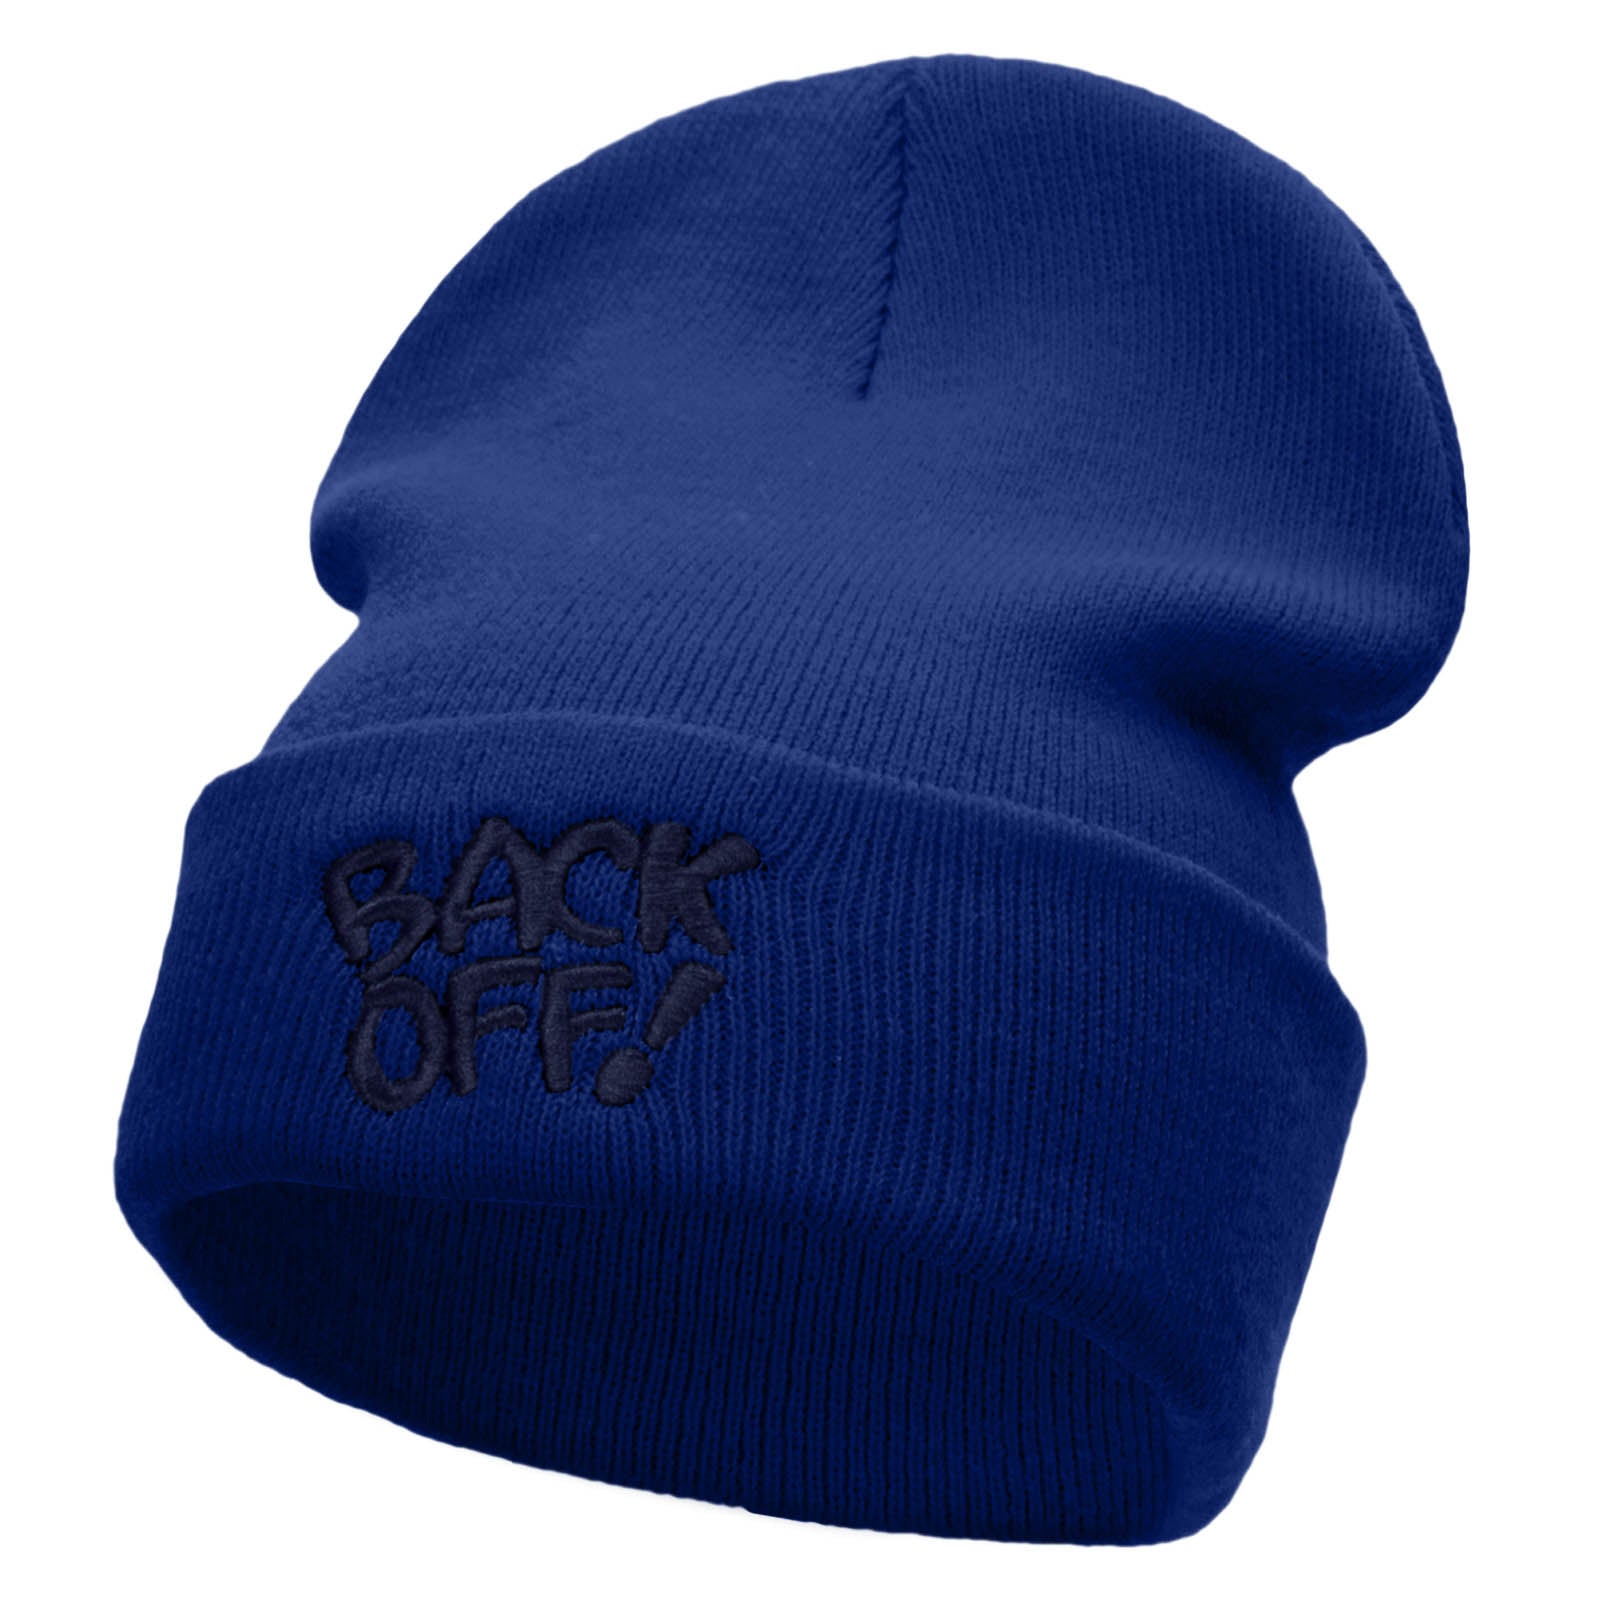 Back Off Phrase Embroidered 12 Inch Long Knitted Beanie - Royal OSFM